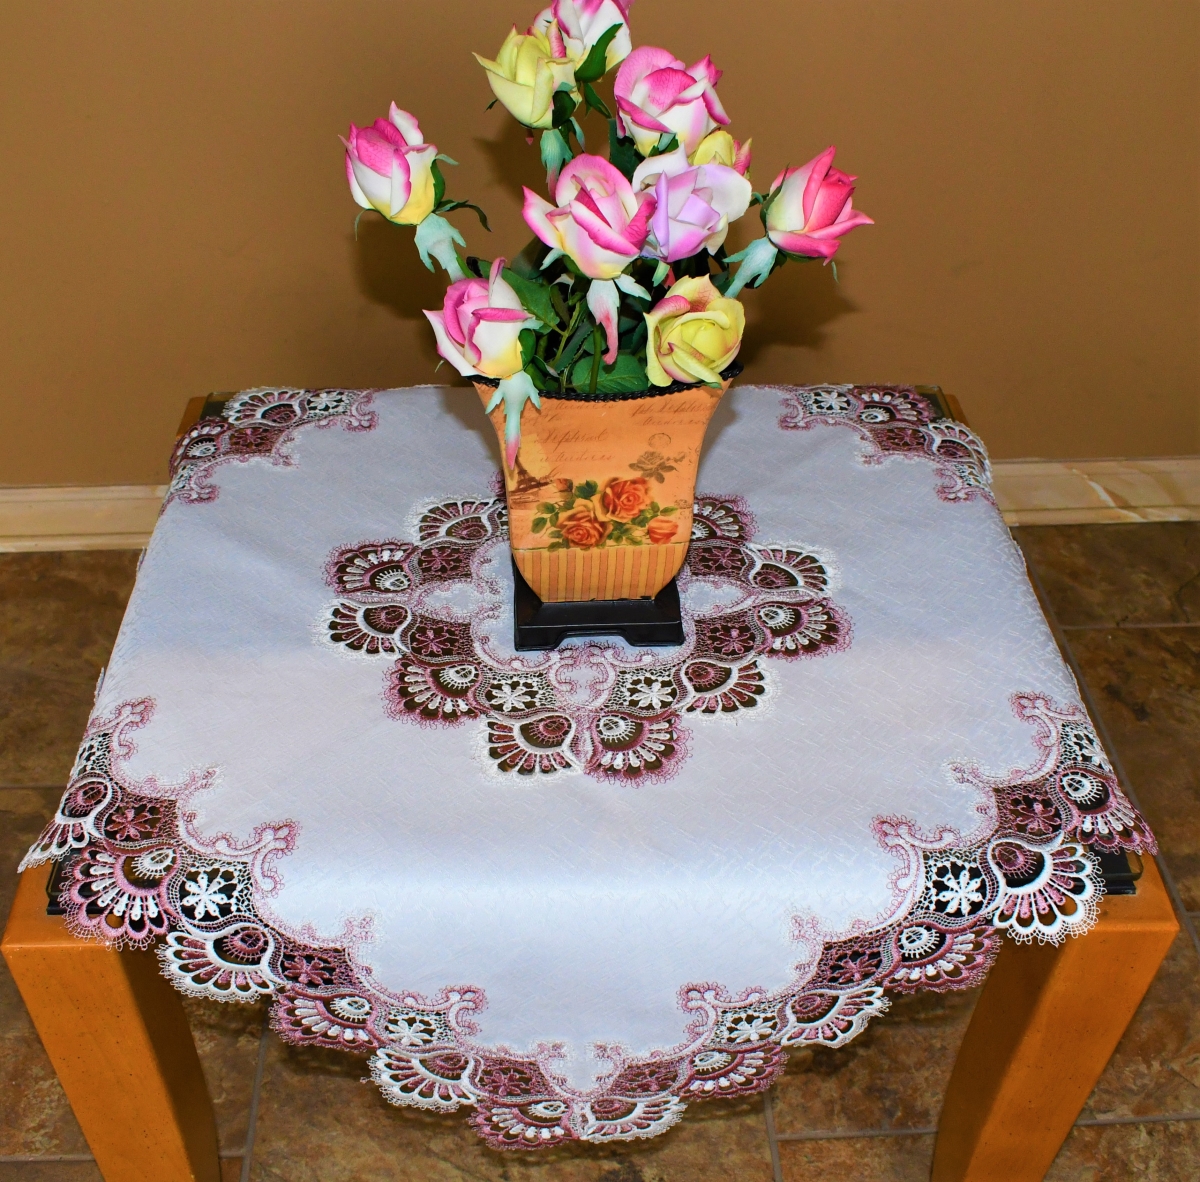 Picture of Sinobrite H8139-P-34x34SQ 34 x 34 in. Purple European Lace with White Antique Fabric Square Table Topper